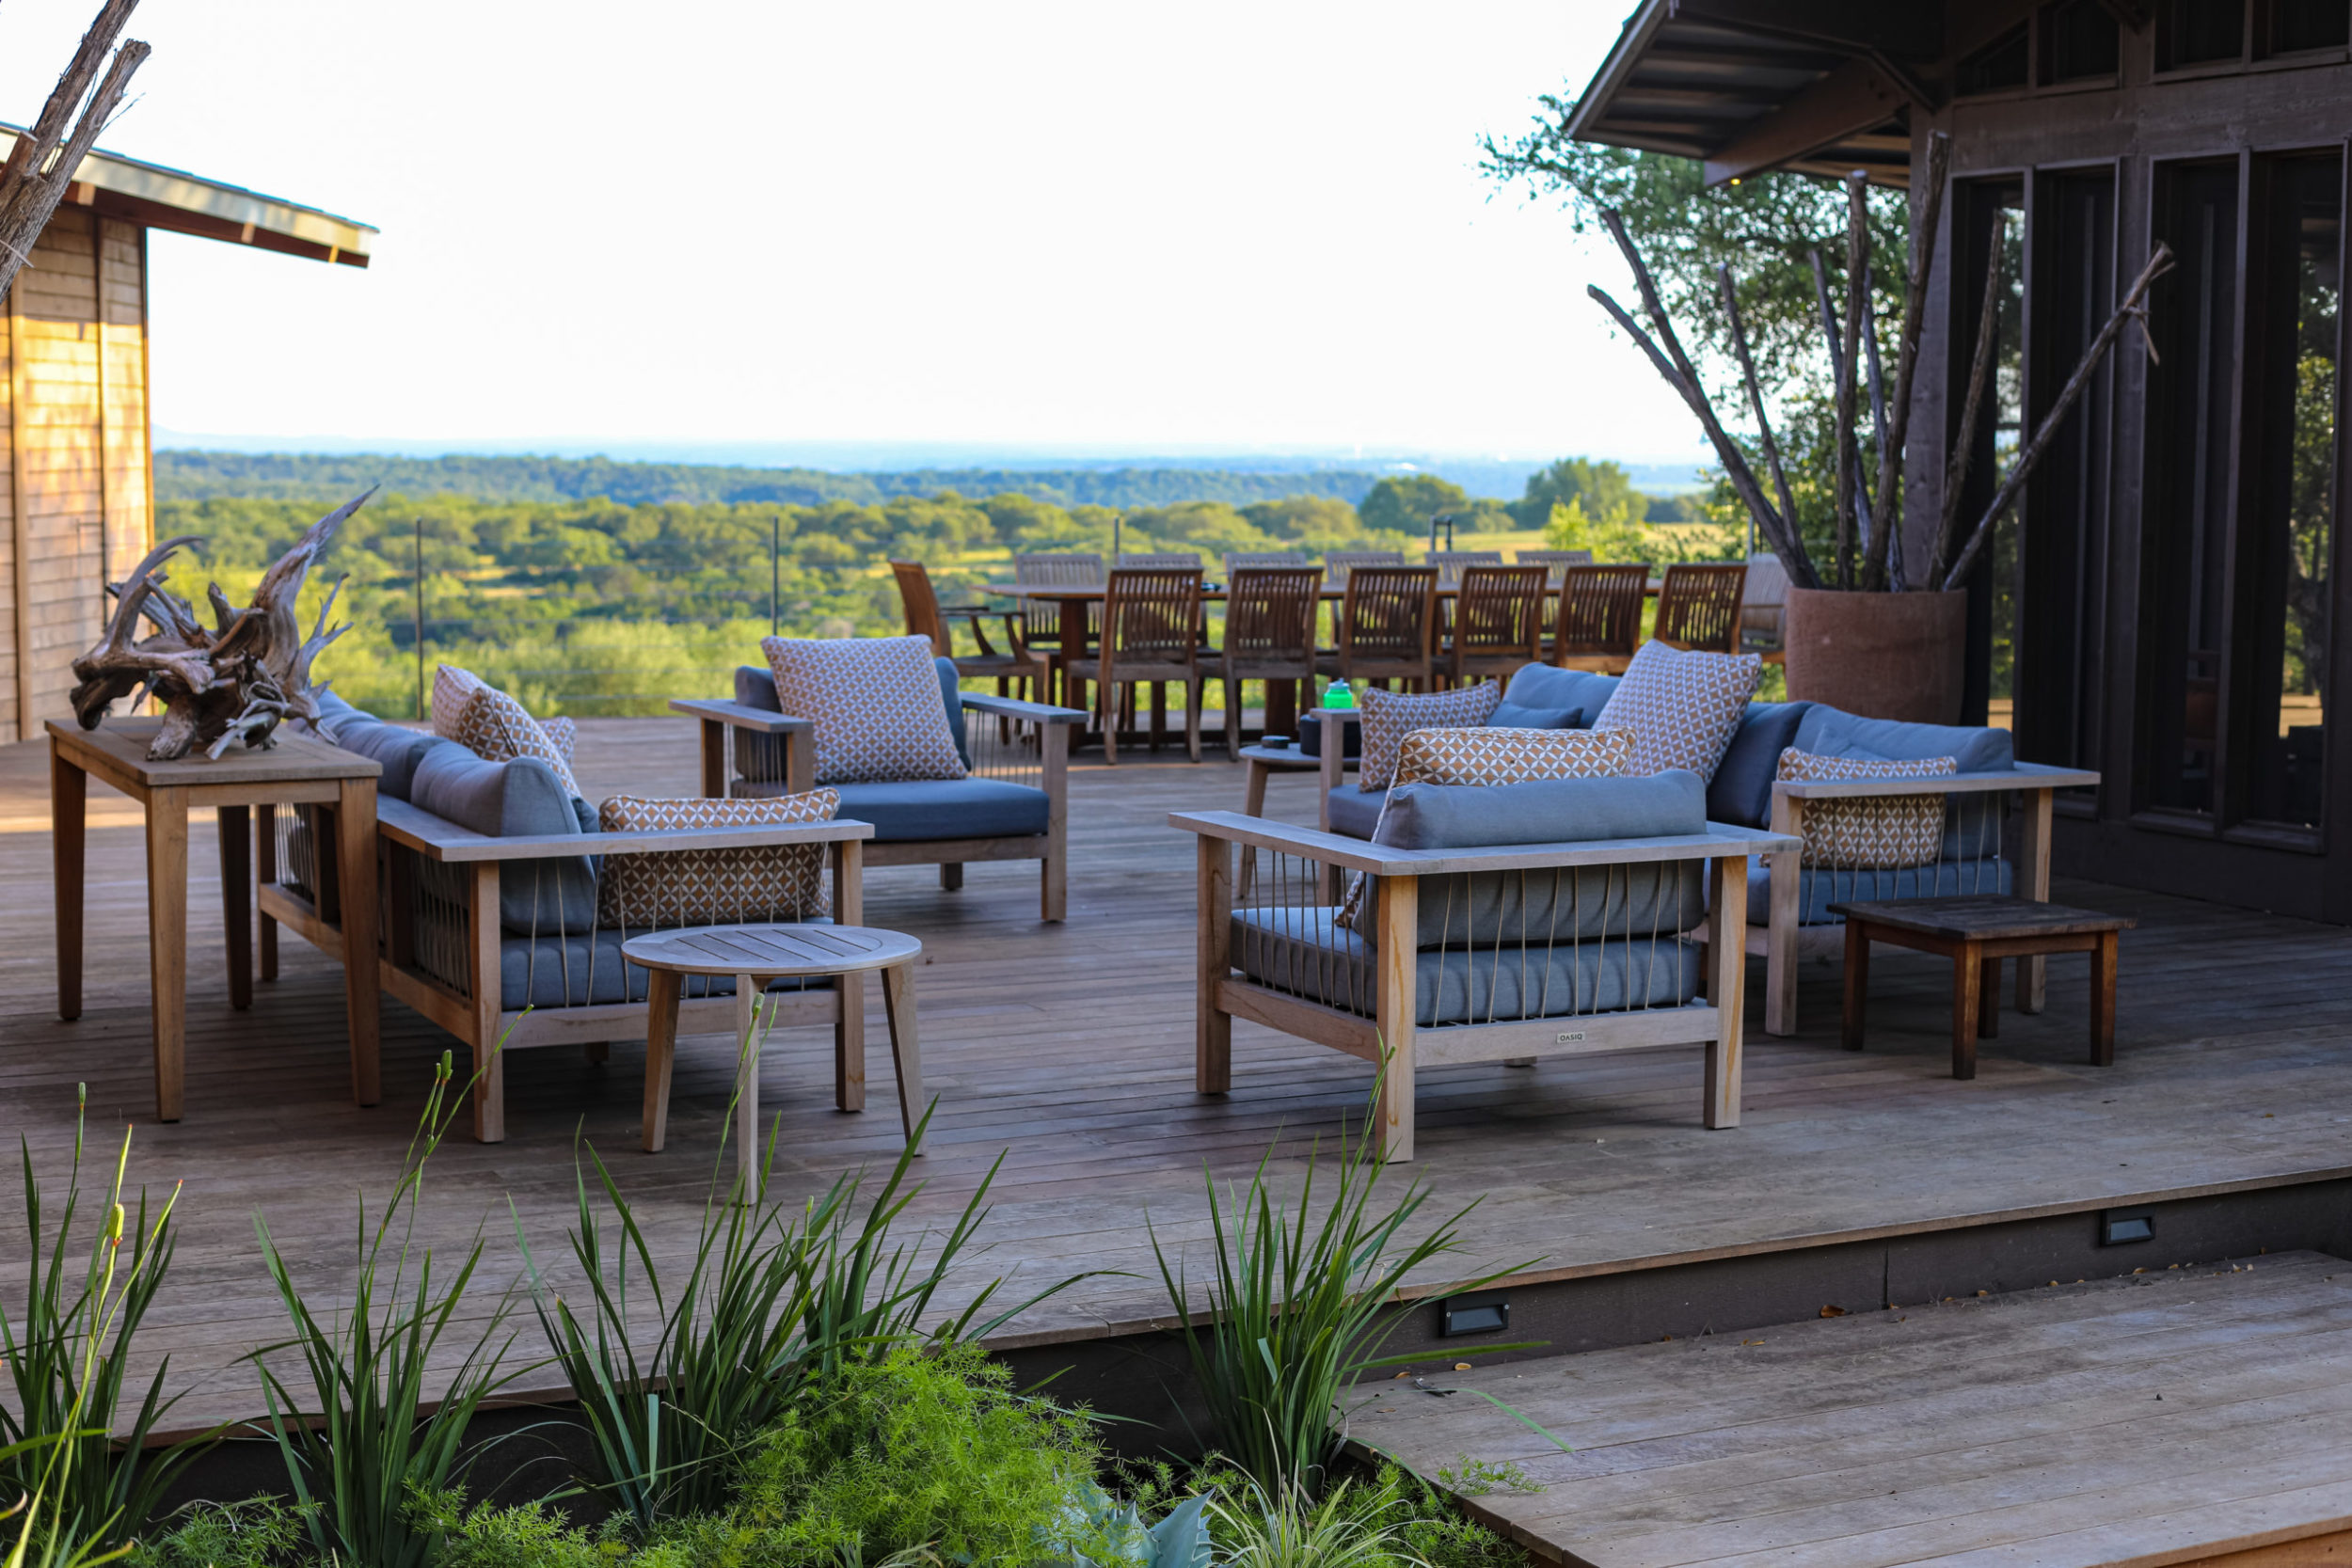 Outdoor Living Area Atop the Expansive Ipe Deck